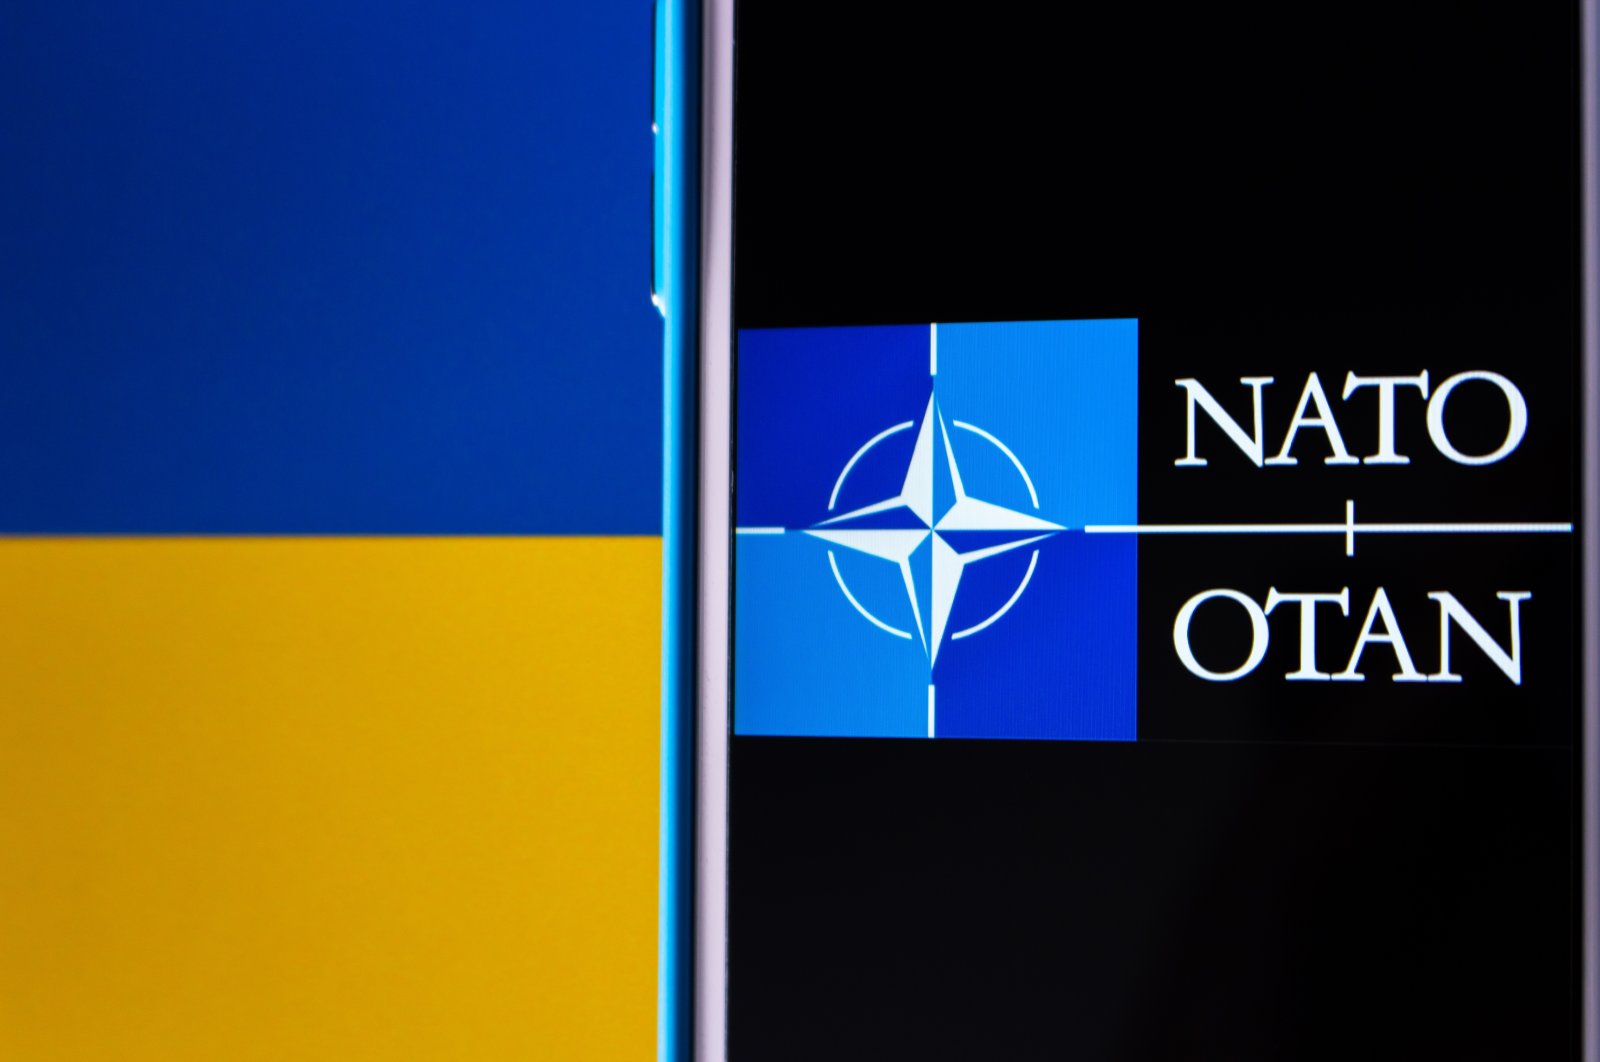 The logo of NATO is seen on the Ukraine flag in a photo taken in Kumamoto, Japan, March 1, 2022. (Photo by Shutterstock)